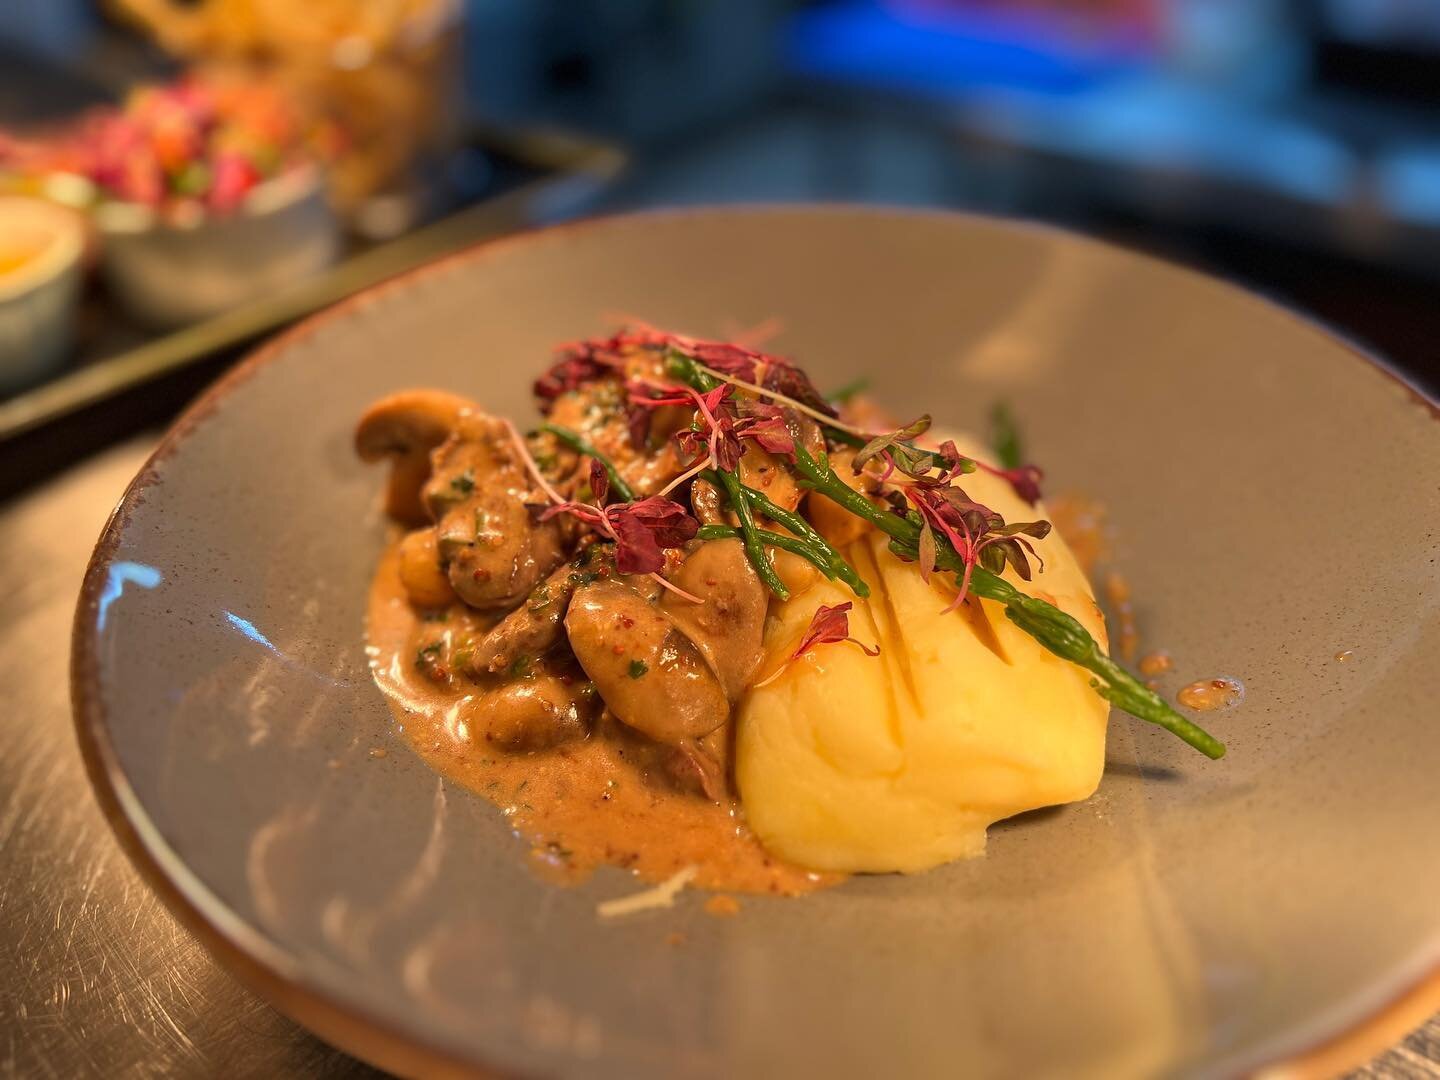 Good food, good mood ❤️

You must try our Fillet stroganoff or mushroom stroganoff the next time you visit! 

#thebest #craftkitchen #thedaffodilinn #walesfood #visitwales #michelinguide